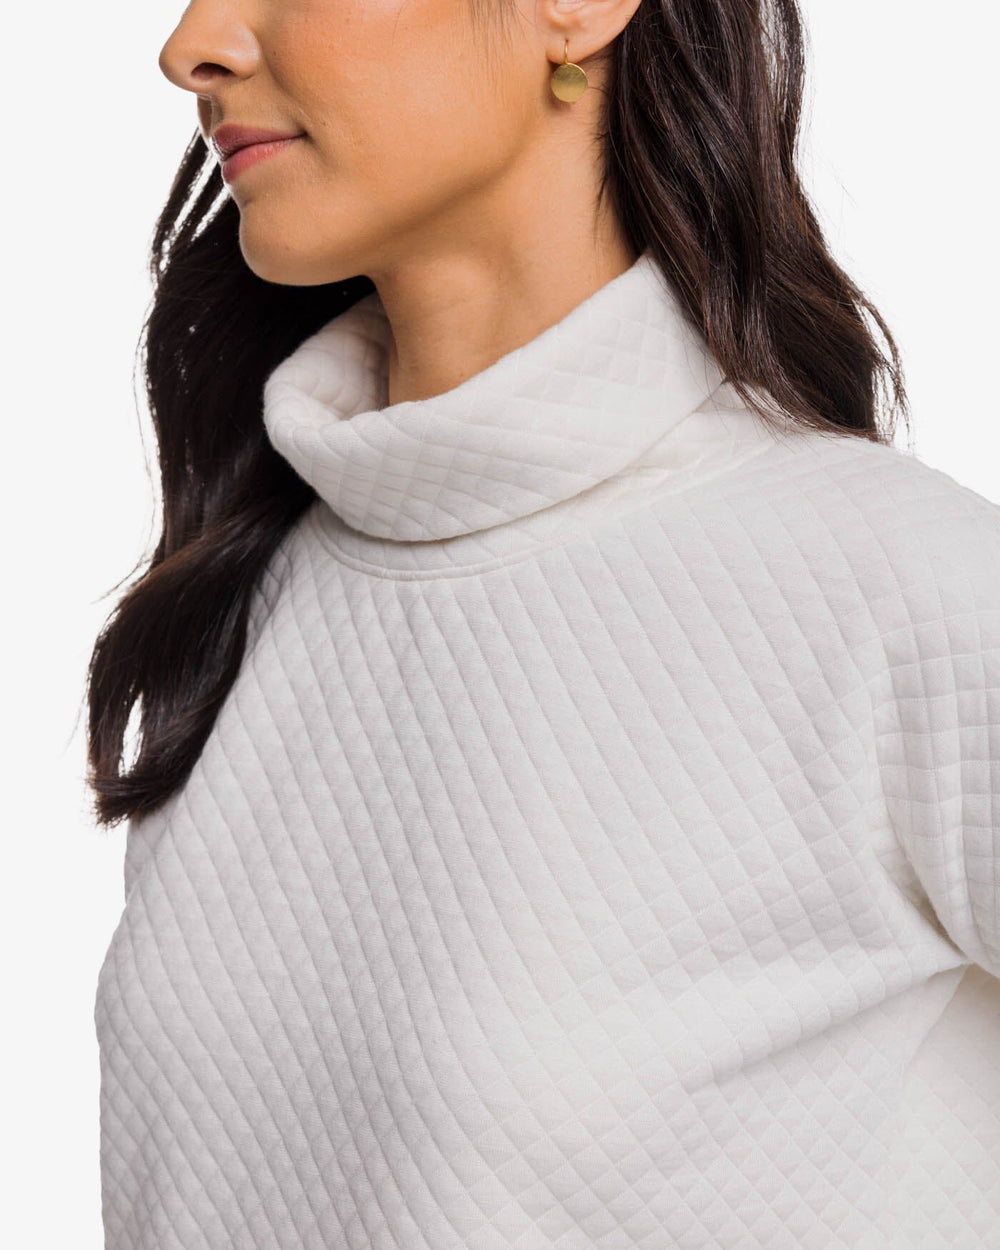 The detail view of the Southern Tide Mellie MockNeck Sweatshirt by Southern Tide - Marshmallow